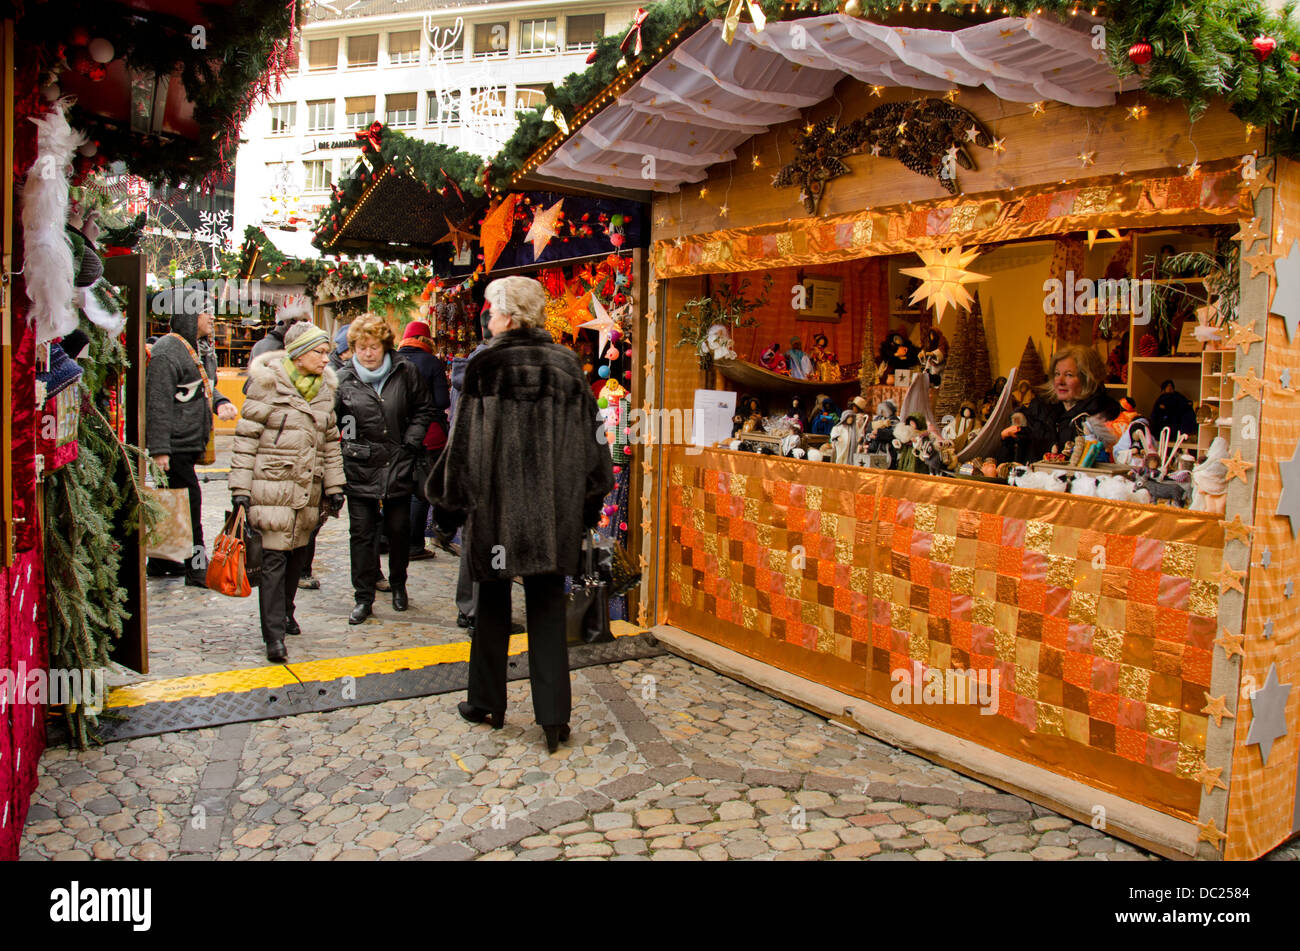 Switzerland, Basel. Basel Winter Holiday Market at Barfusserplatz. Typical vendor stand at winter market with people shopping. Stock Photo